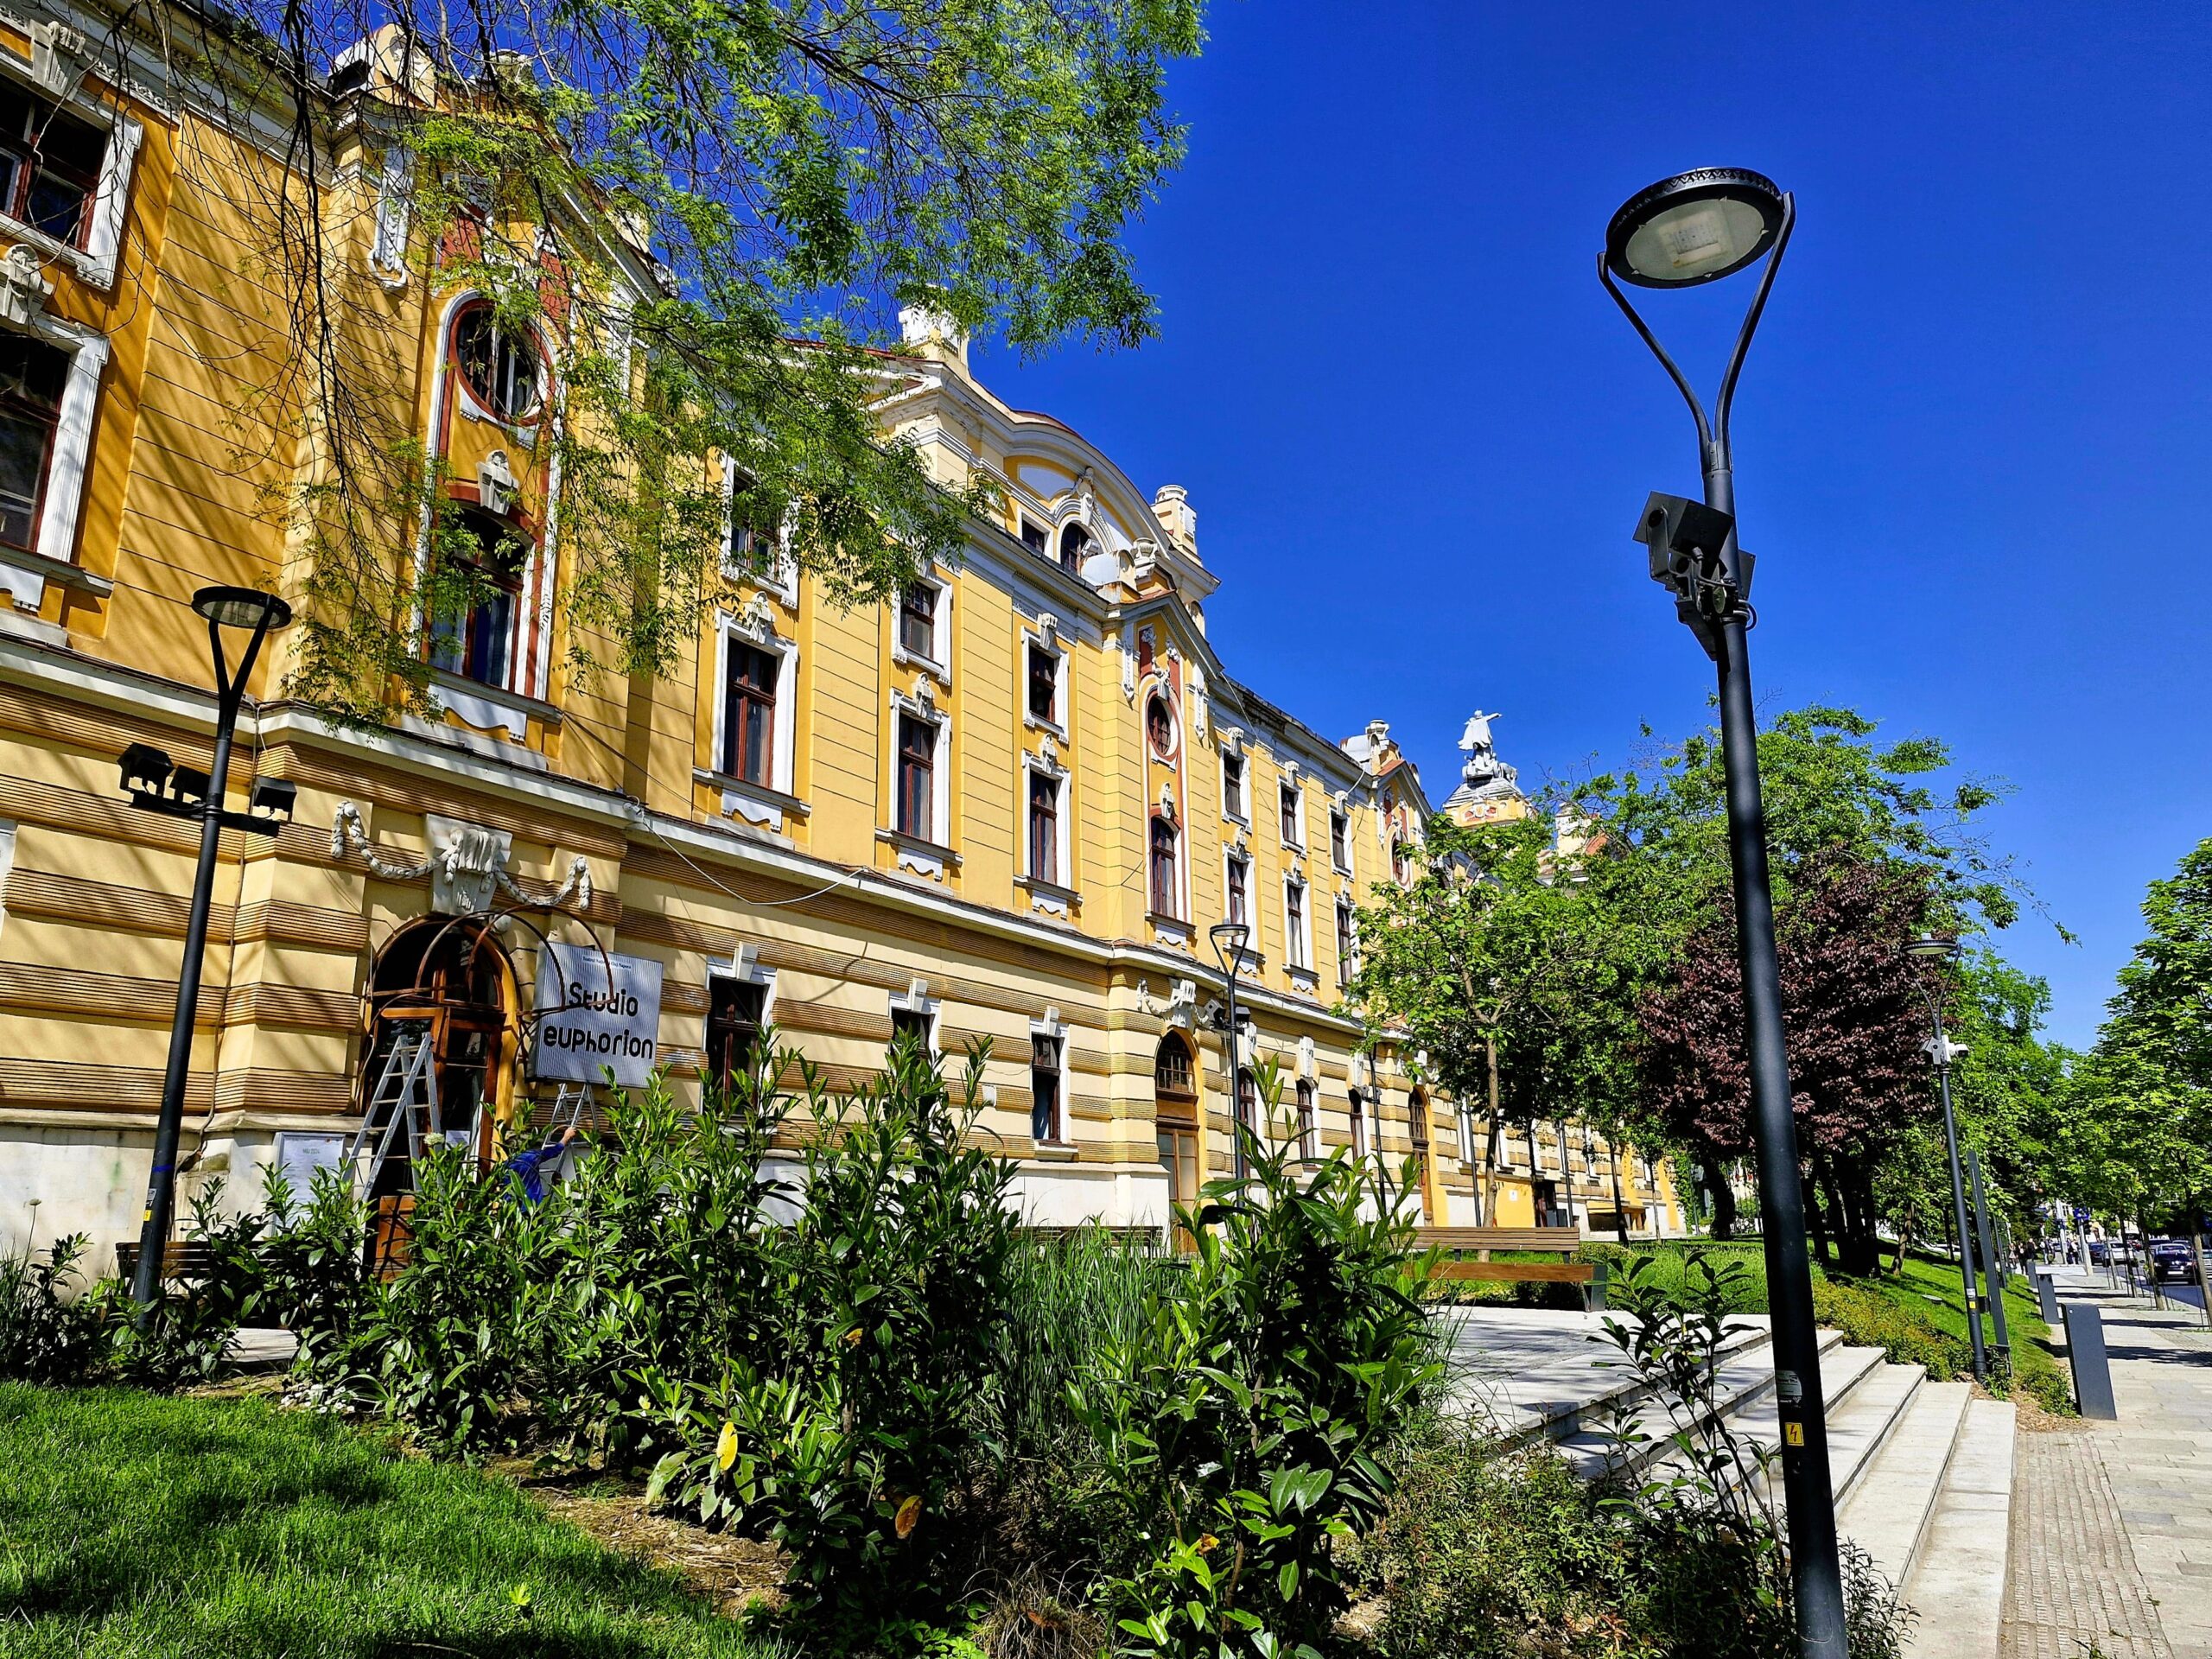 The yellow Opera building in Cluj-Napoca with contrasting green trees and clear blue sky.